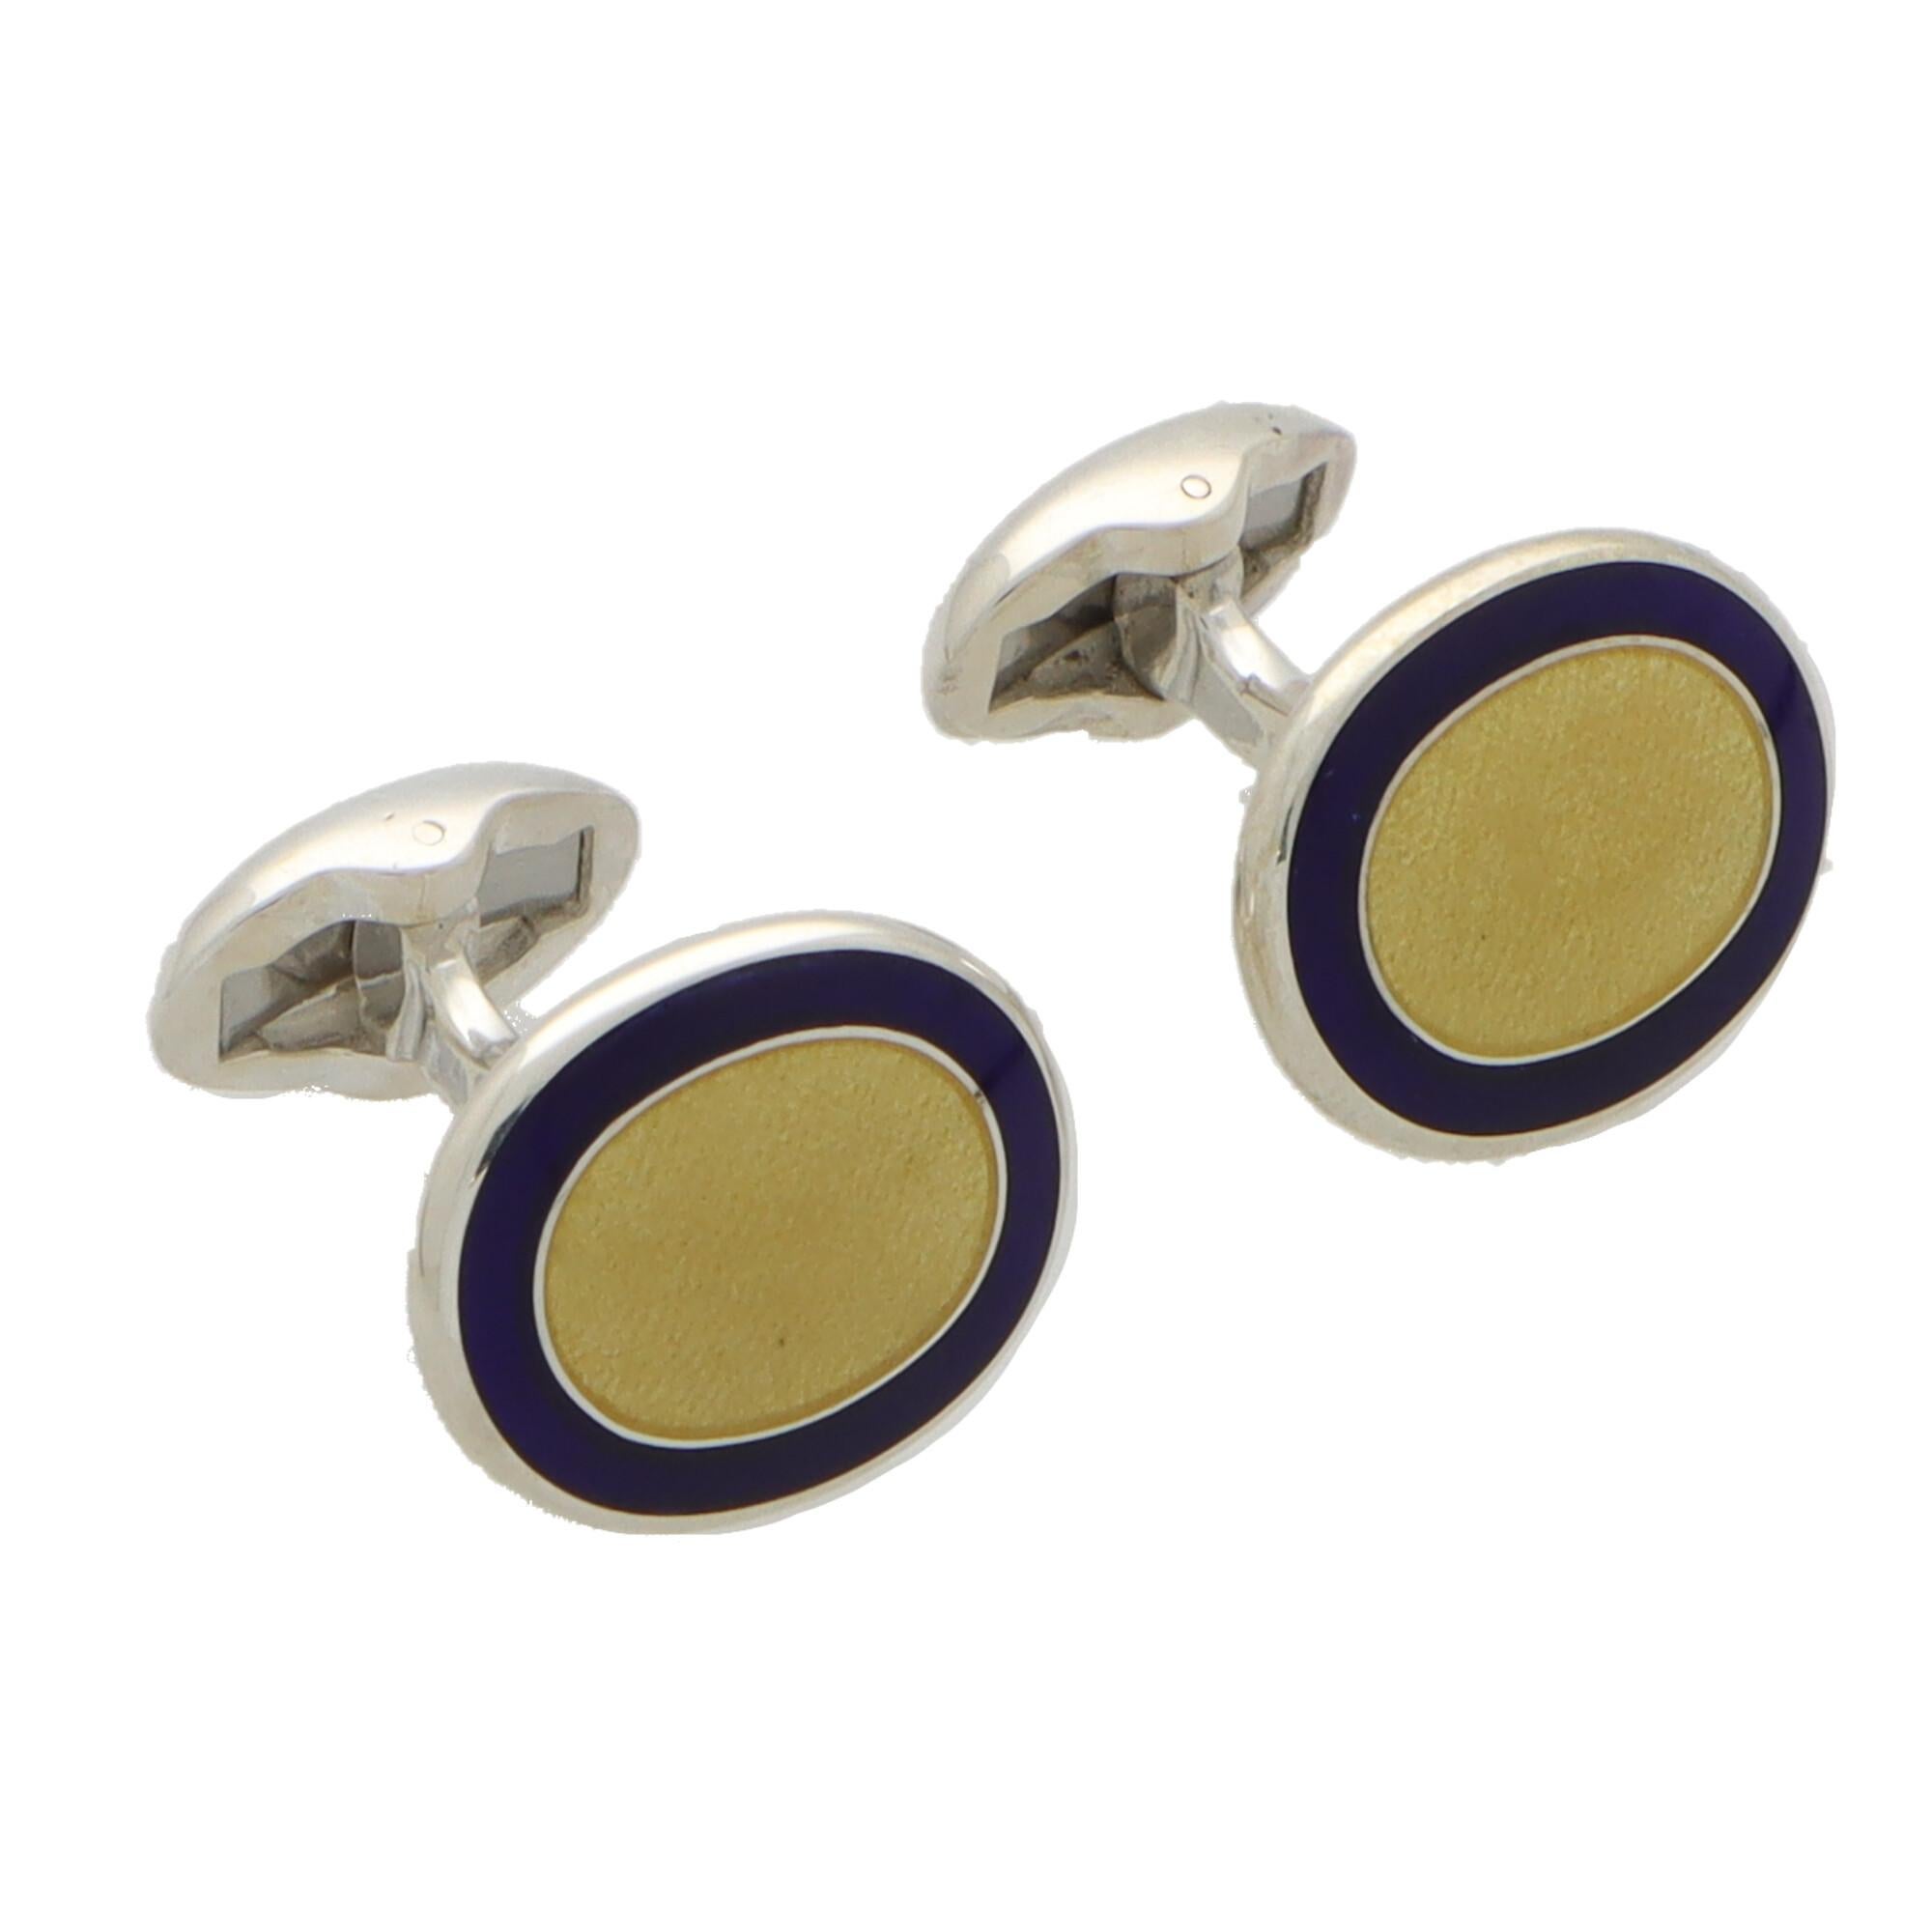 A stylish pair of navy and yellow enamel swivel back cufflinks made in British sterling silver.

Each cufflink is composed of two oval faces set centrally with a textured vibrant yellow panel and bordered by royal navy blue. They are secured to